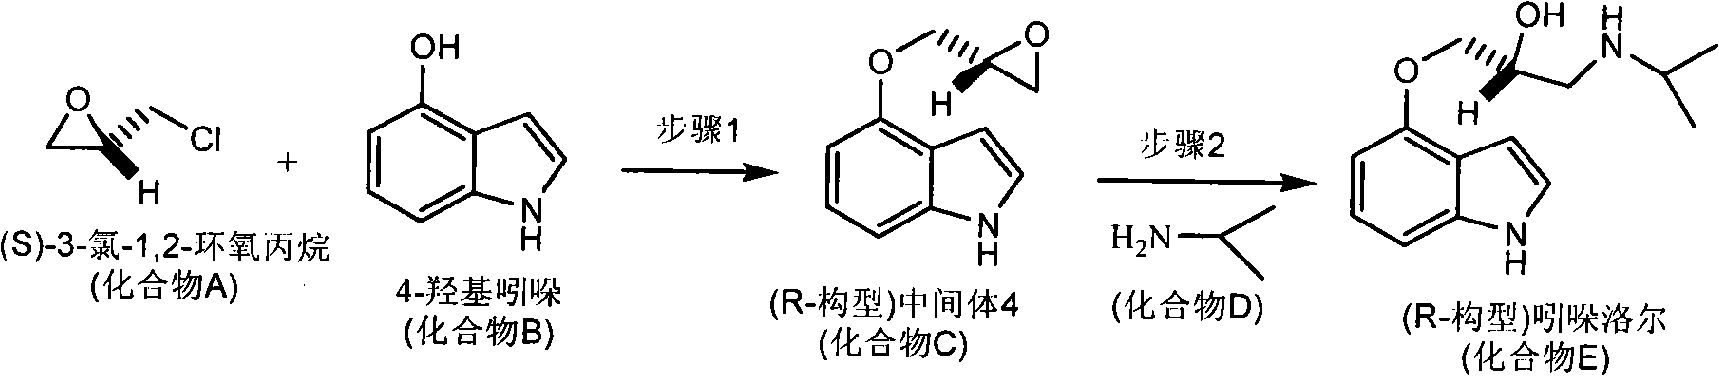 Synthetic methods of chiral aryloxy propanol amine compounds and salts thereof